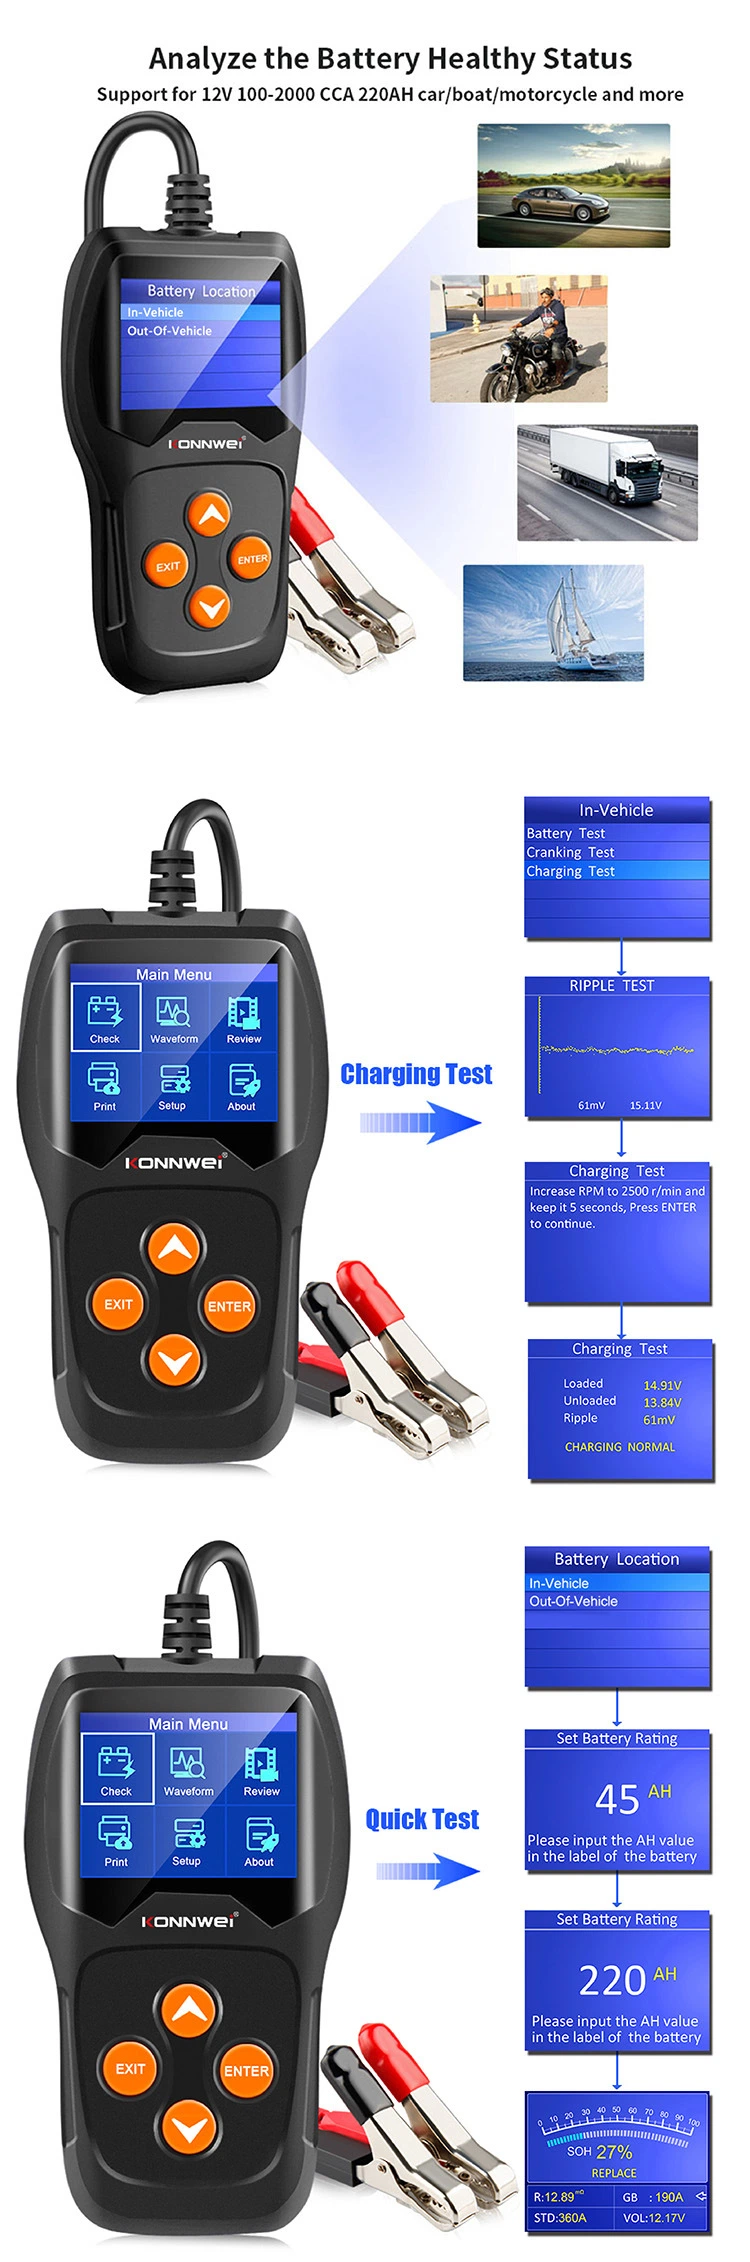 Car Battery Tester Kw600 Battery Diagnostic Tools